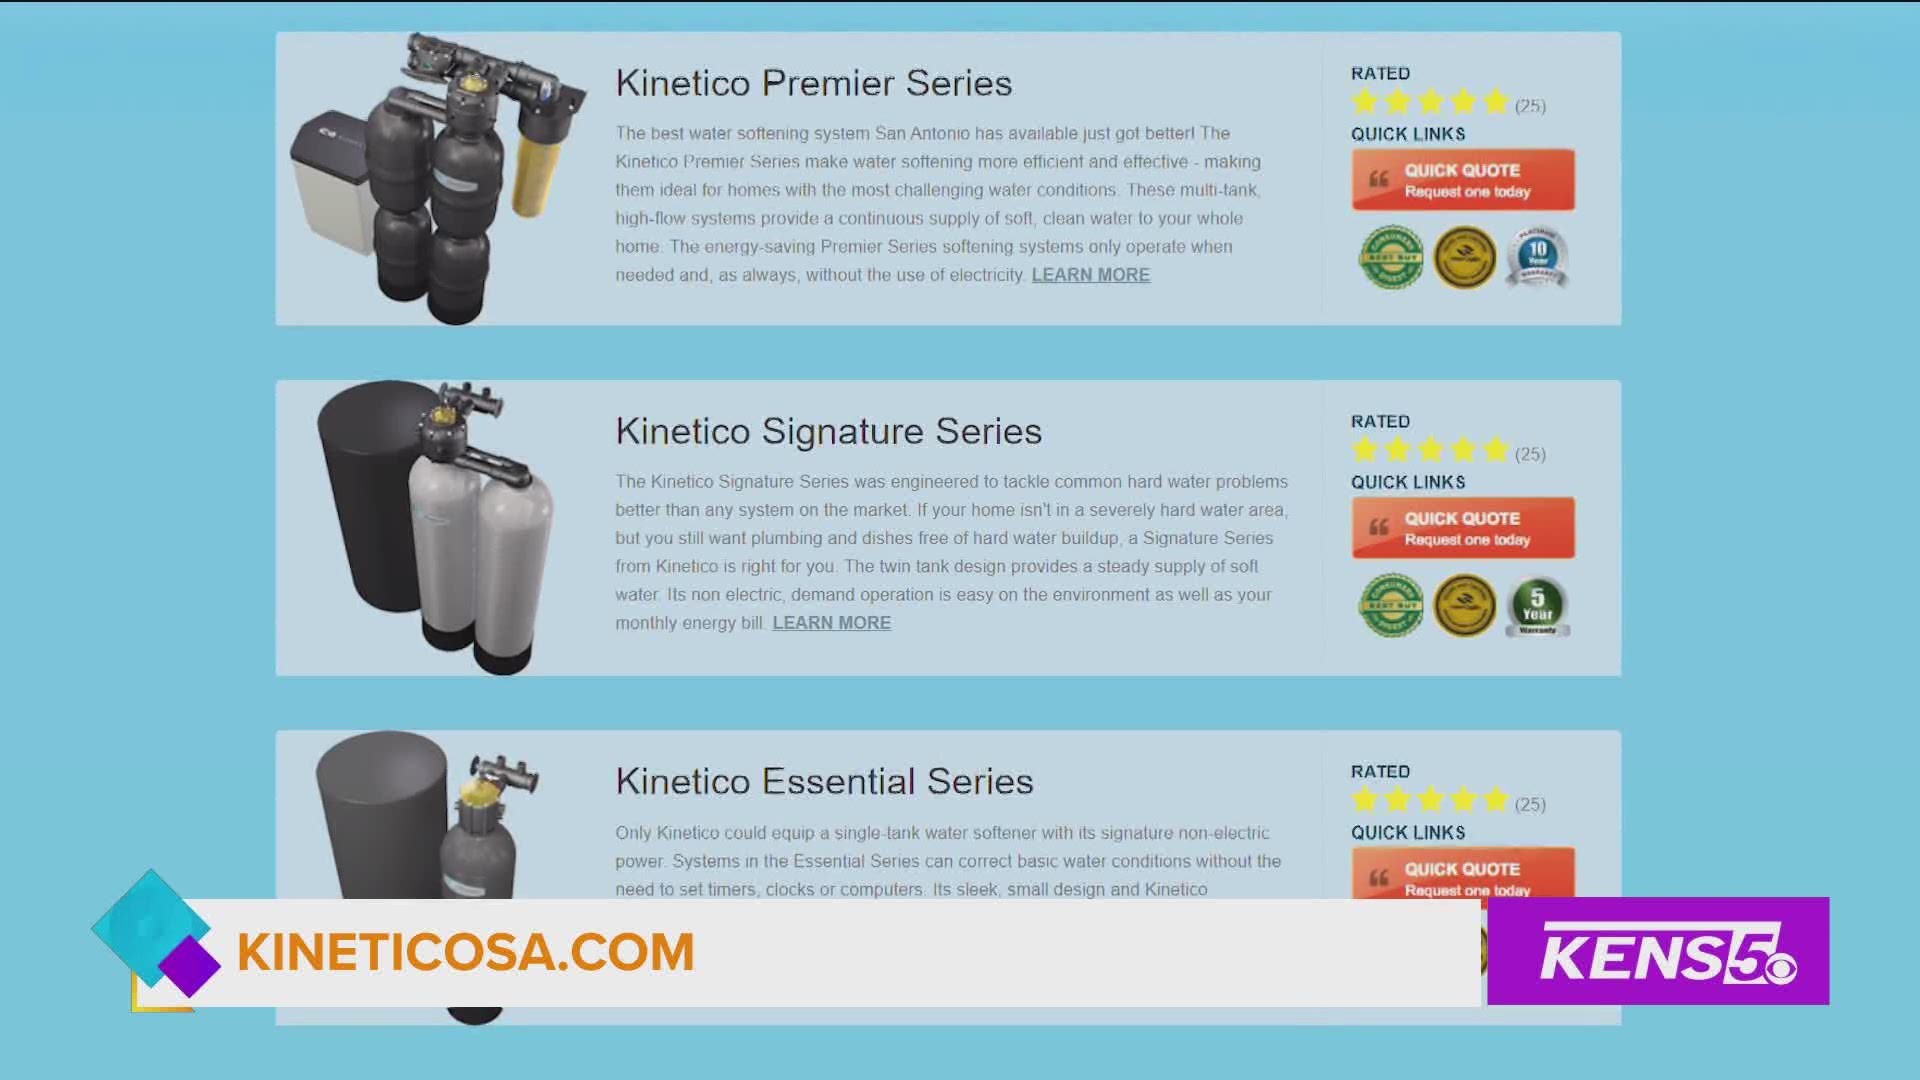 Try a Kinetico water softener free for 90 days with no obligations!